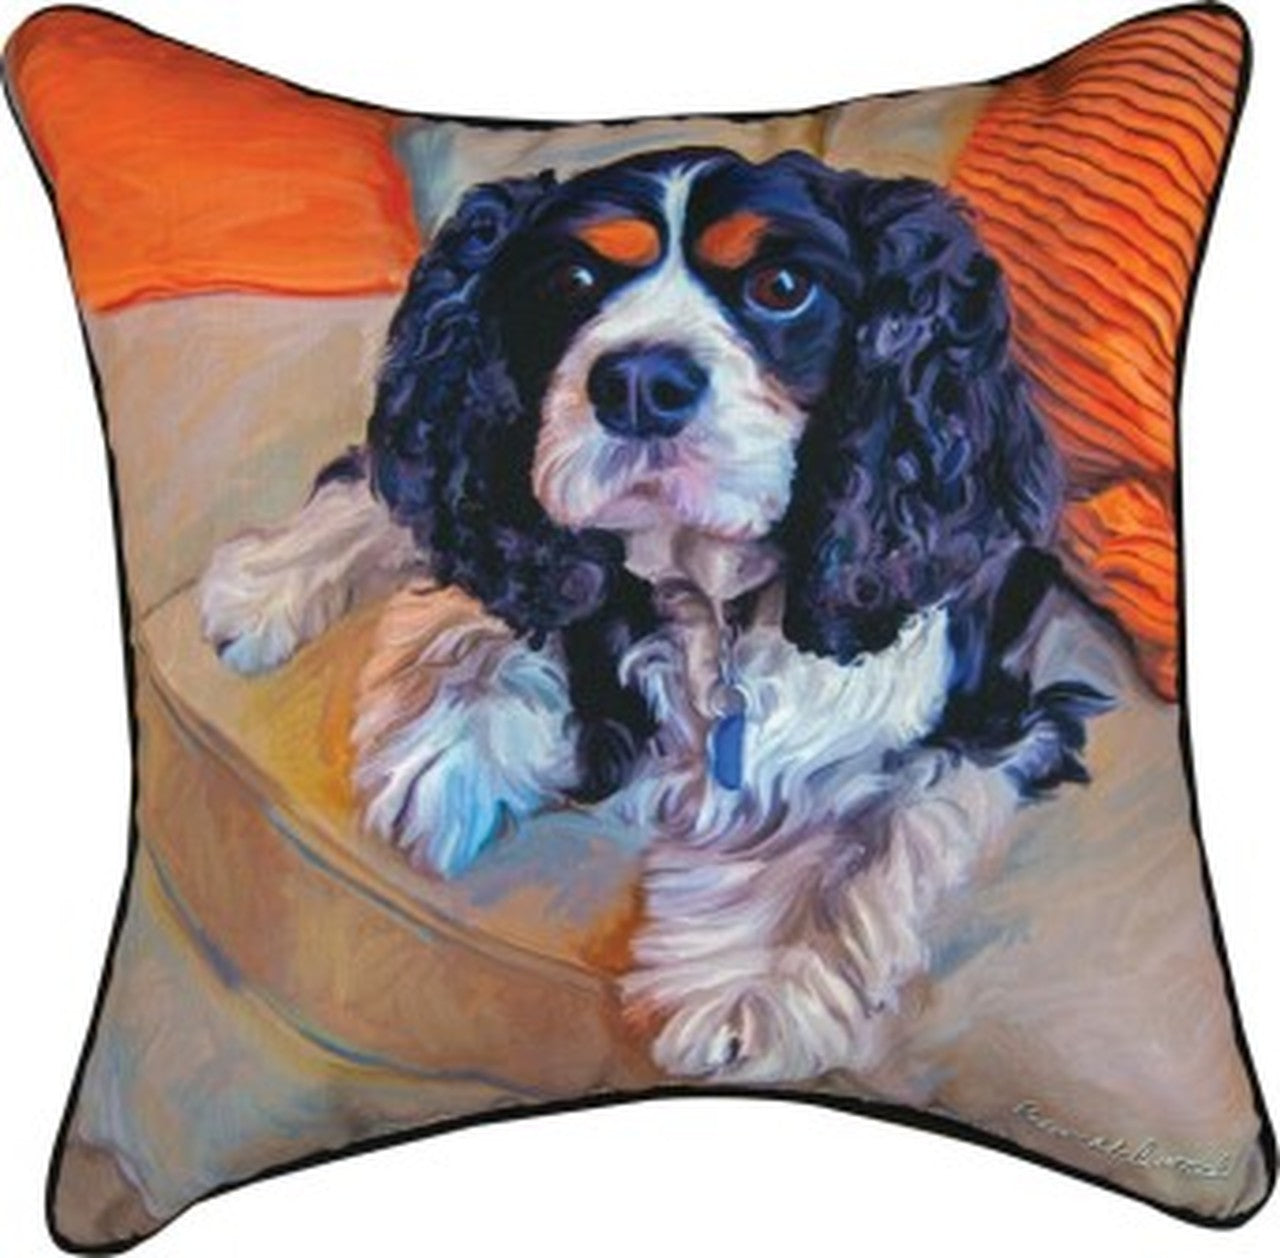 Charles in Charge 18" Pillow